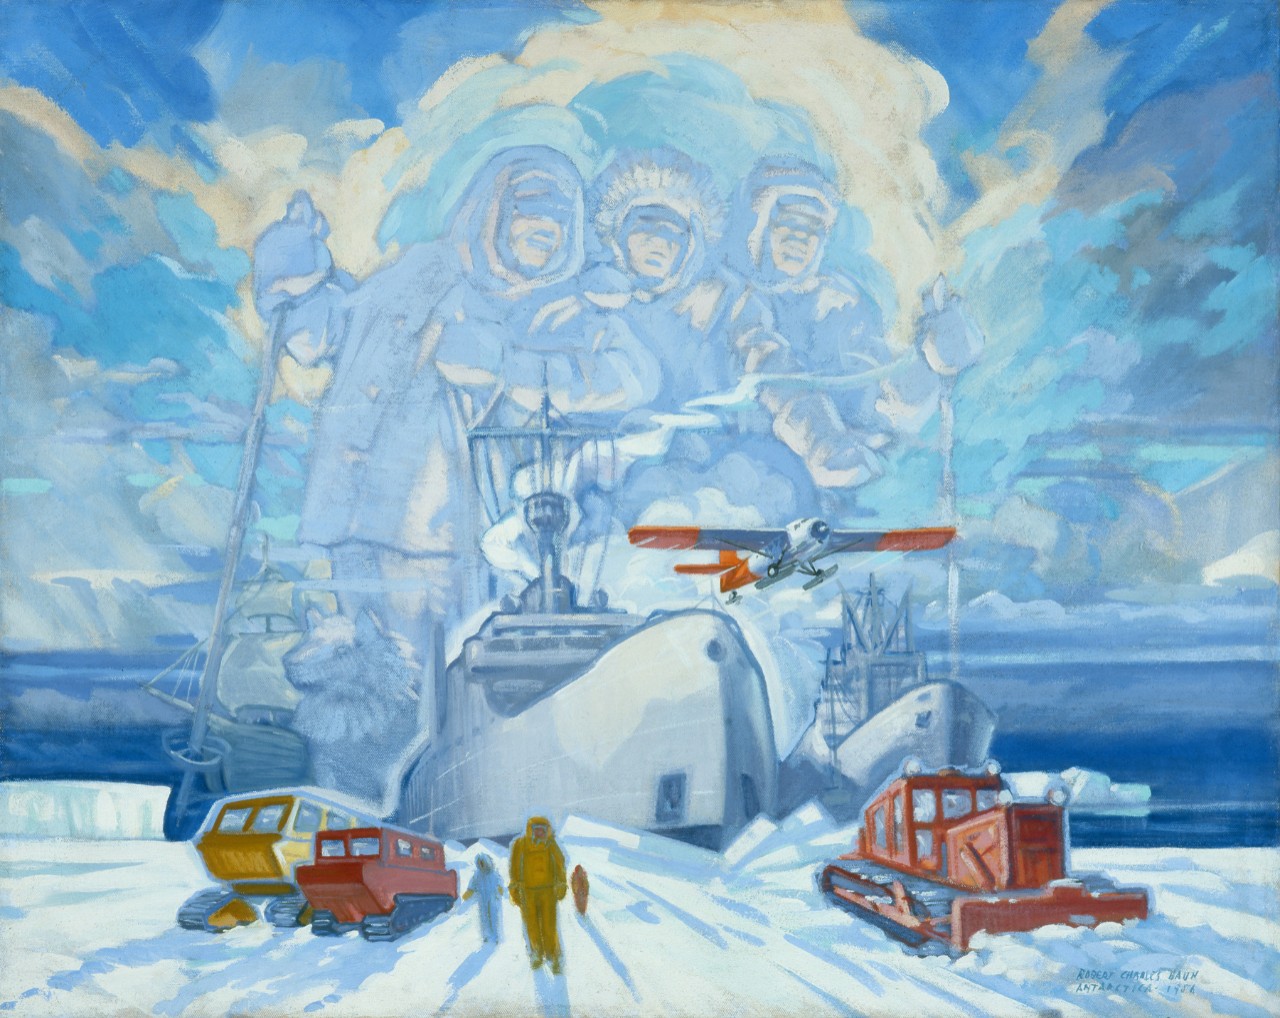 The fleet and equipment used in the operation with the leaders rendered in the clouds above